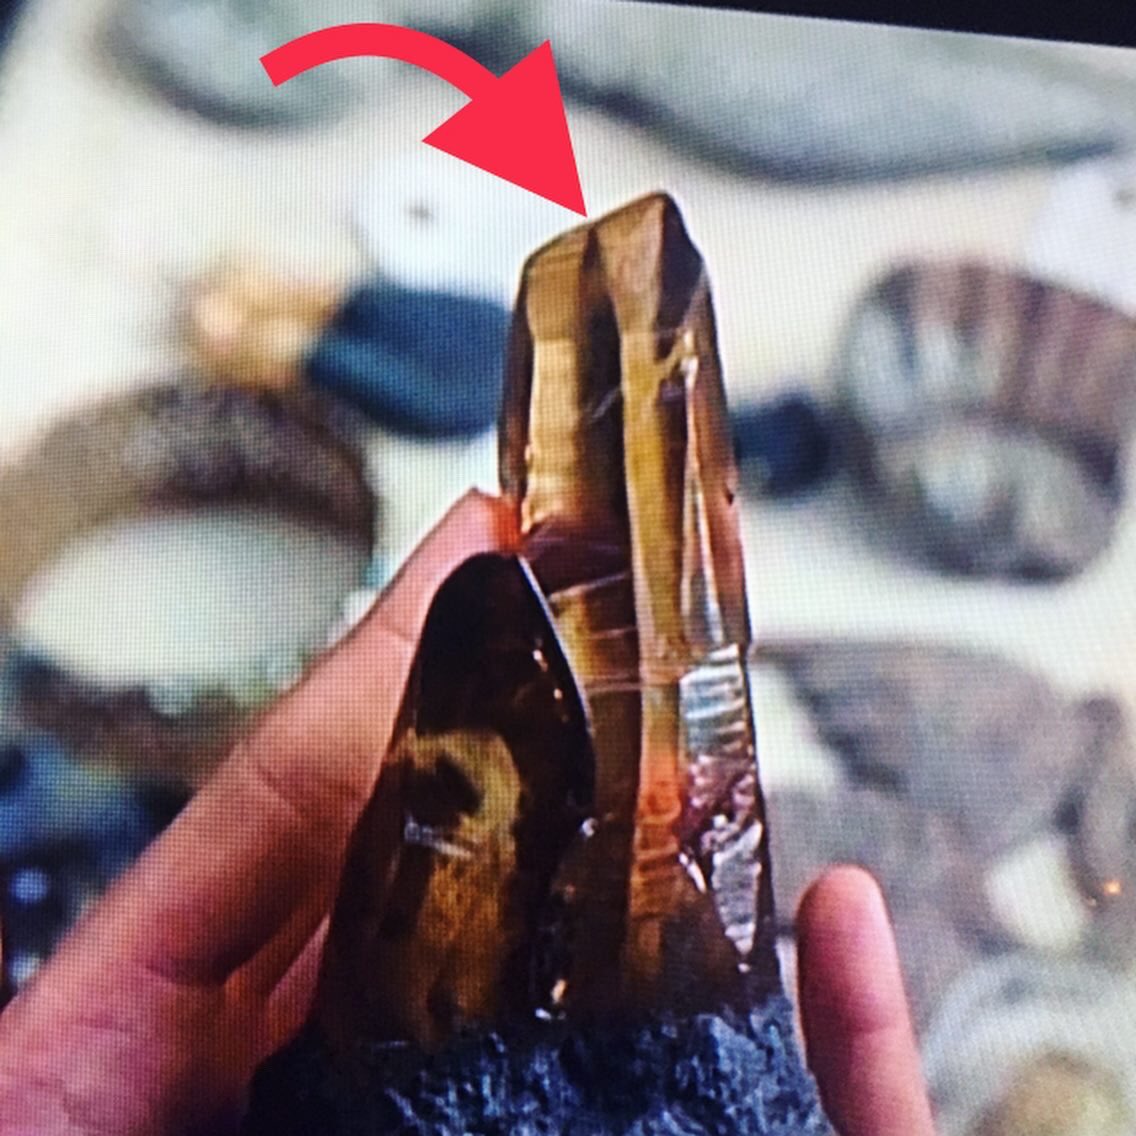 4. Quartz (var. citrine) does not have perfect cleavage like the prop in the movie !